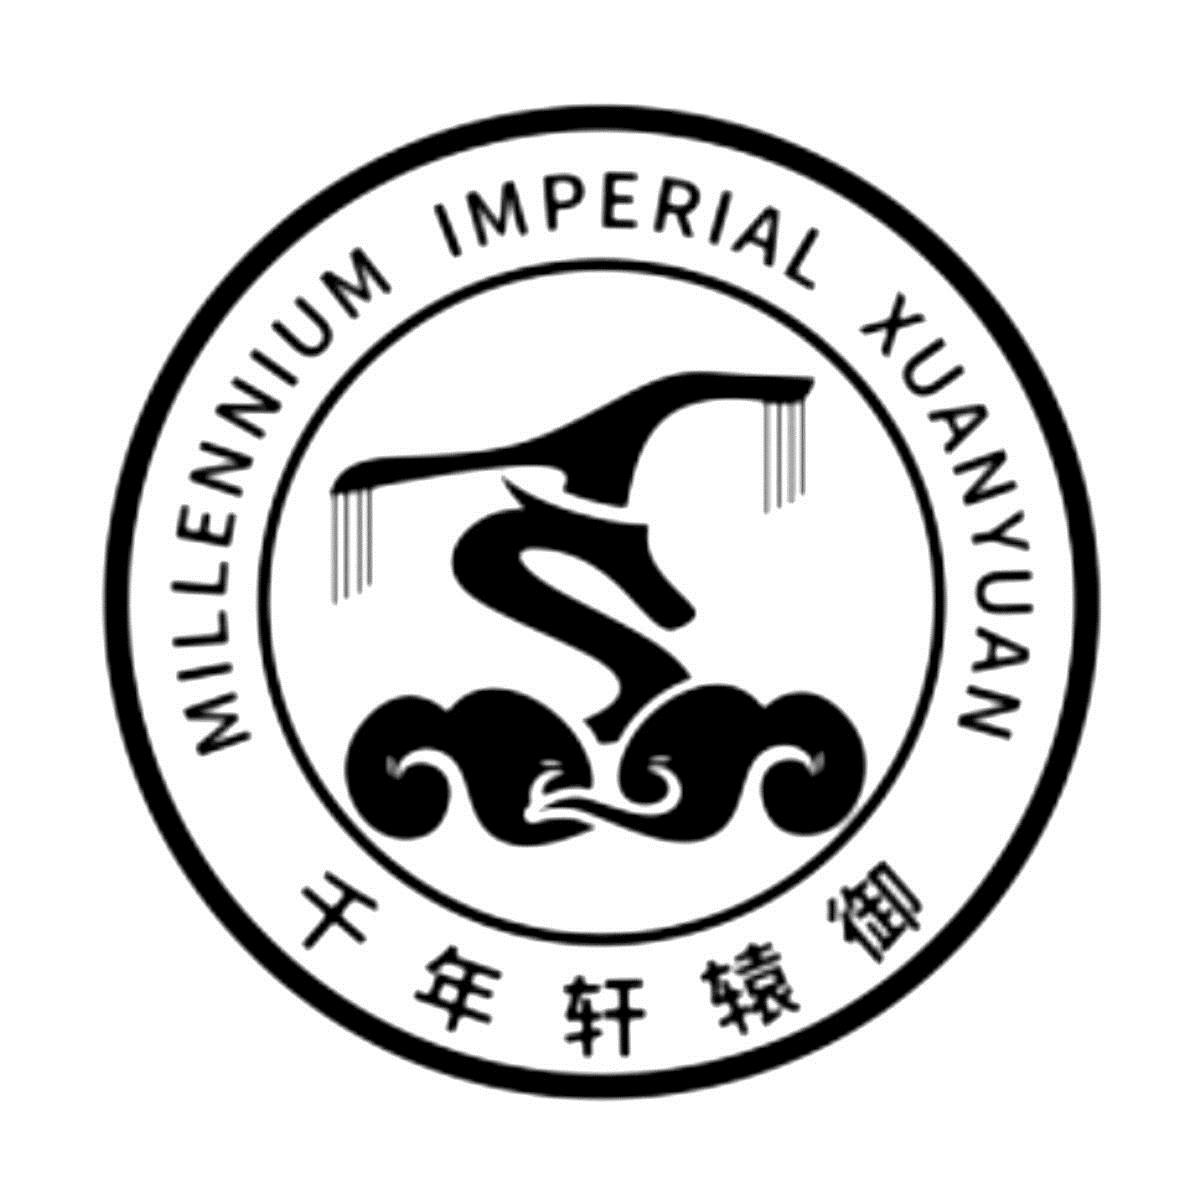 MILLENNIUM IMPERIAL XUANYUAN 千年轩辕御